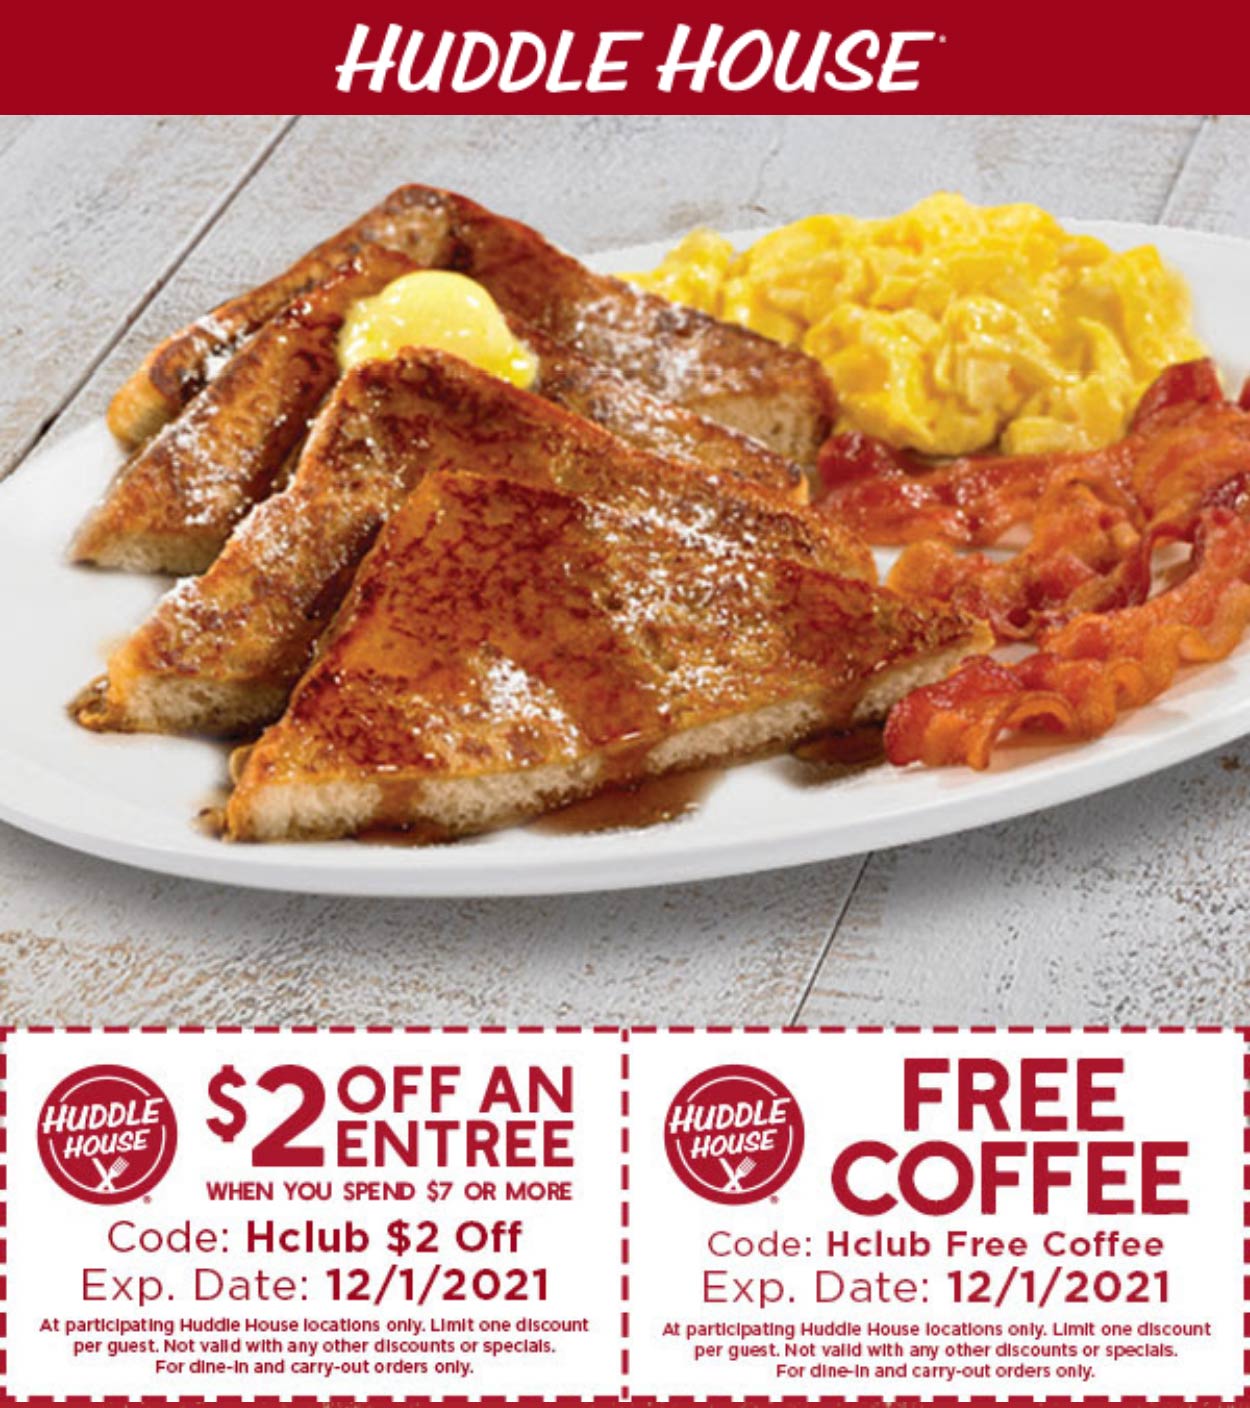 Huddle House restaurants Coupon  Free coffee & $2 off an entree at Huddle House #huddlehouse 